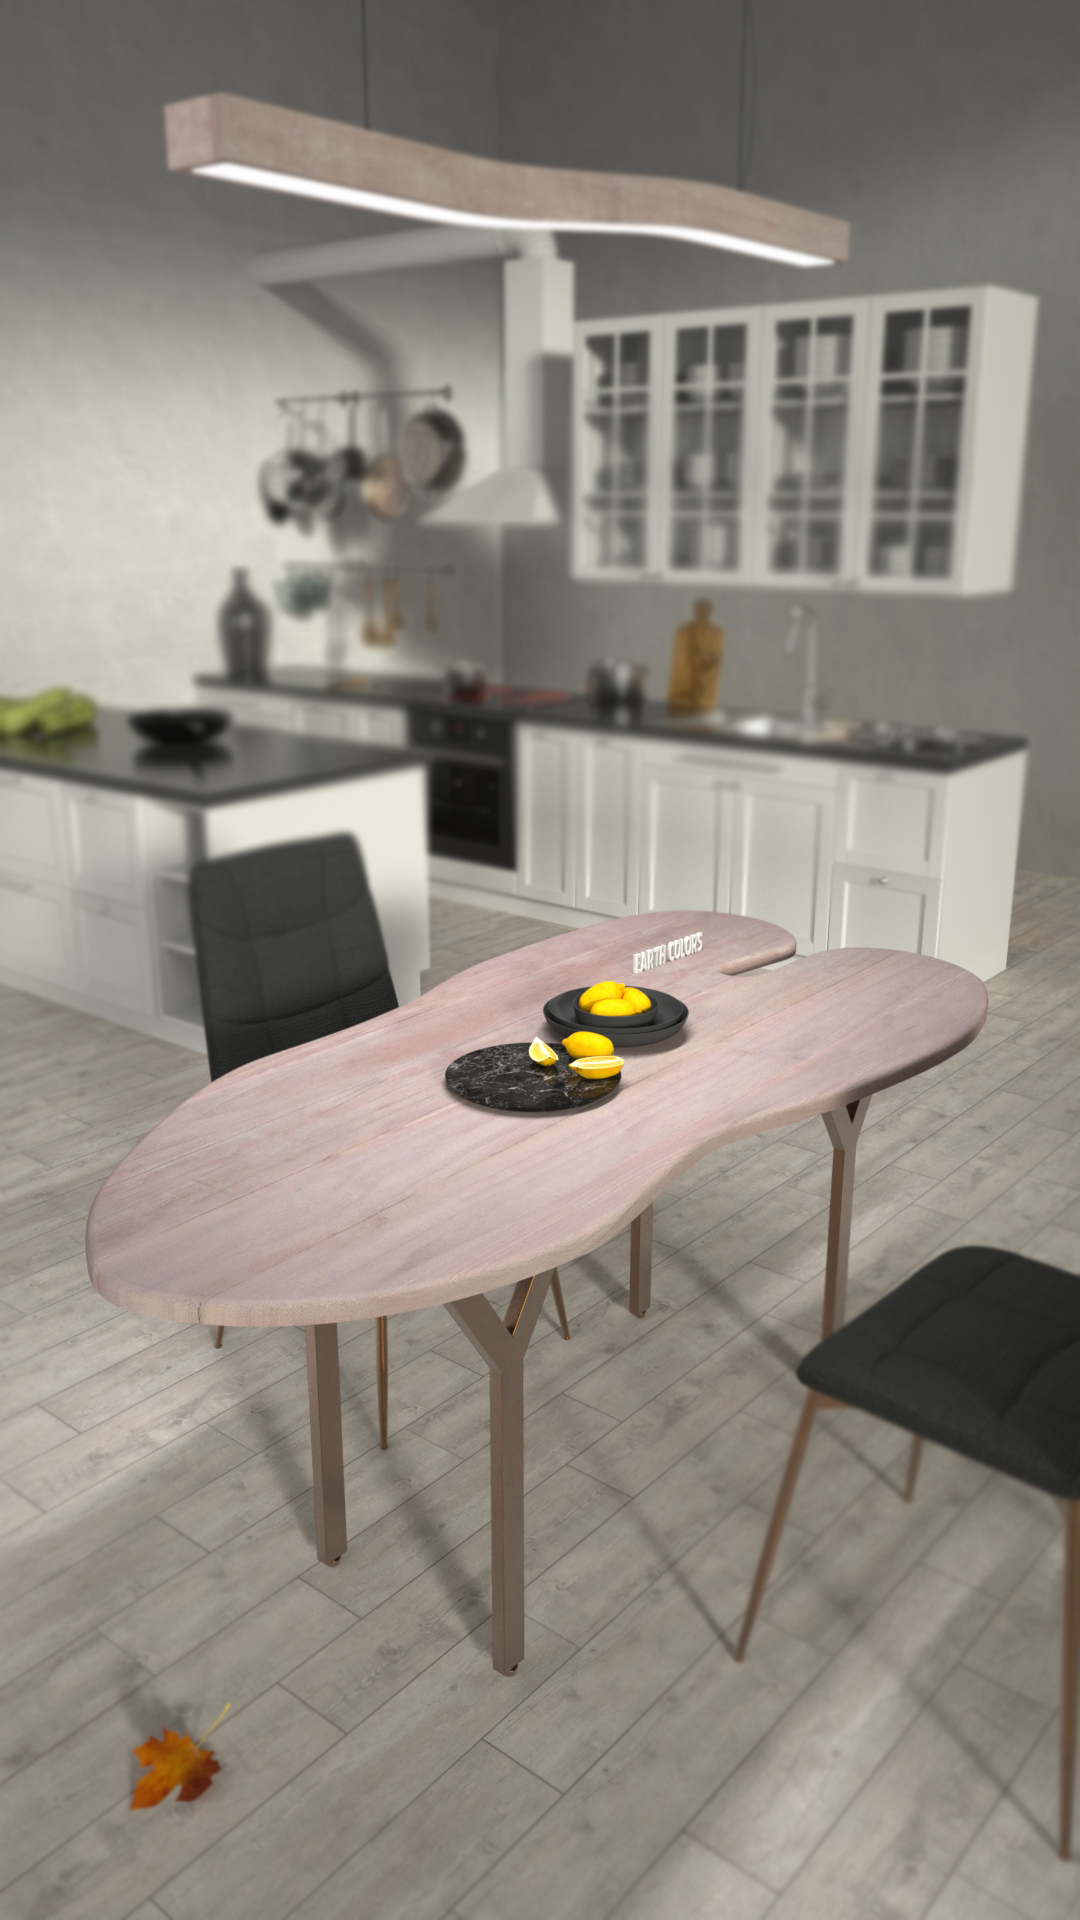 EARTHCOLORS designs better Leaf shaped dining table than others